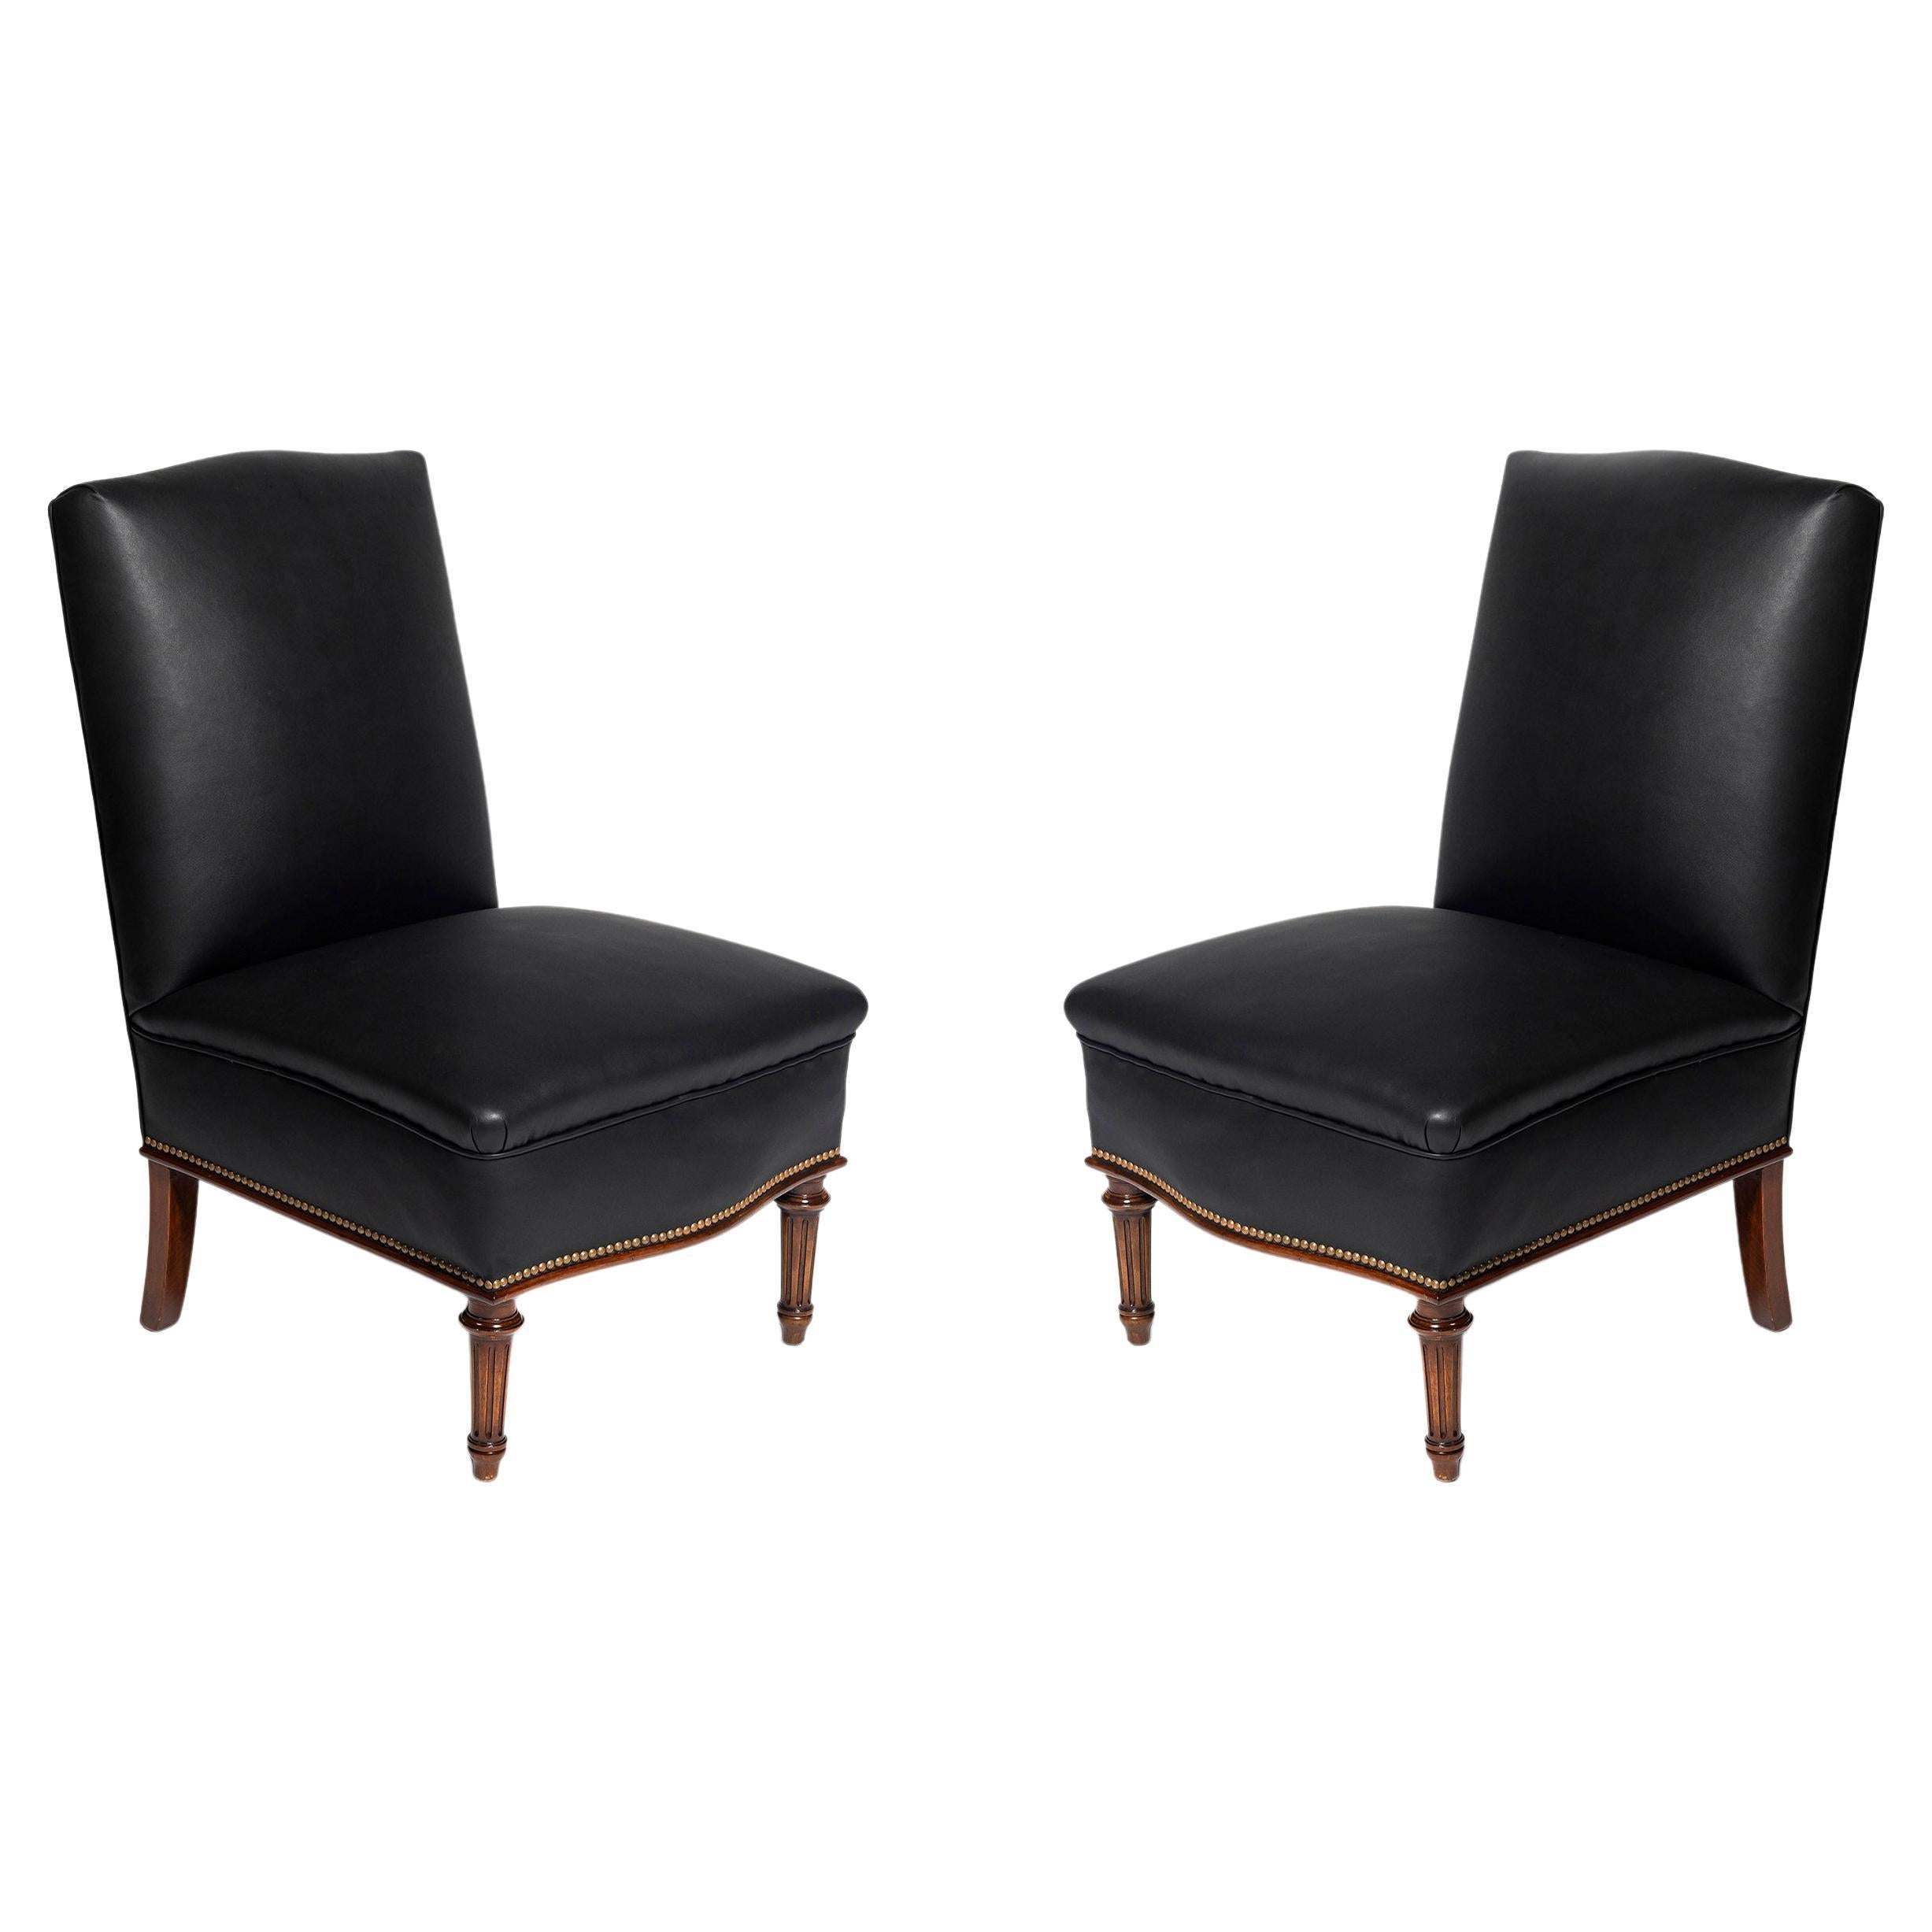 Pair of Wood and Leather Slipper Chairs by Comte, Argentina, circa 1940